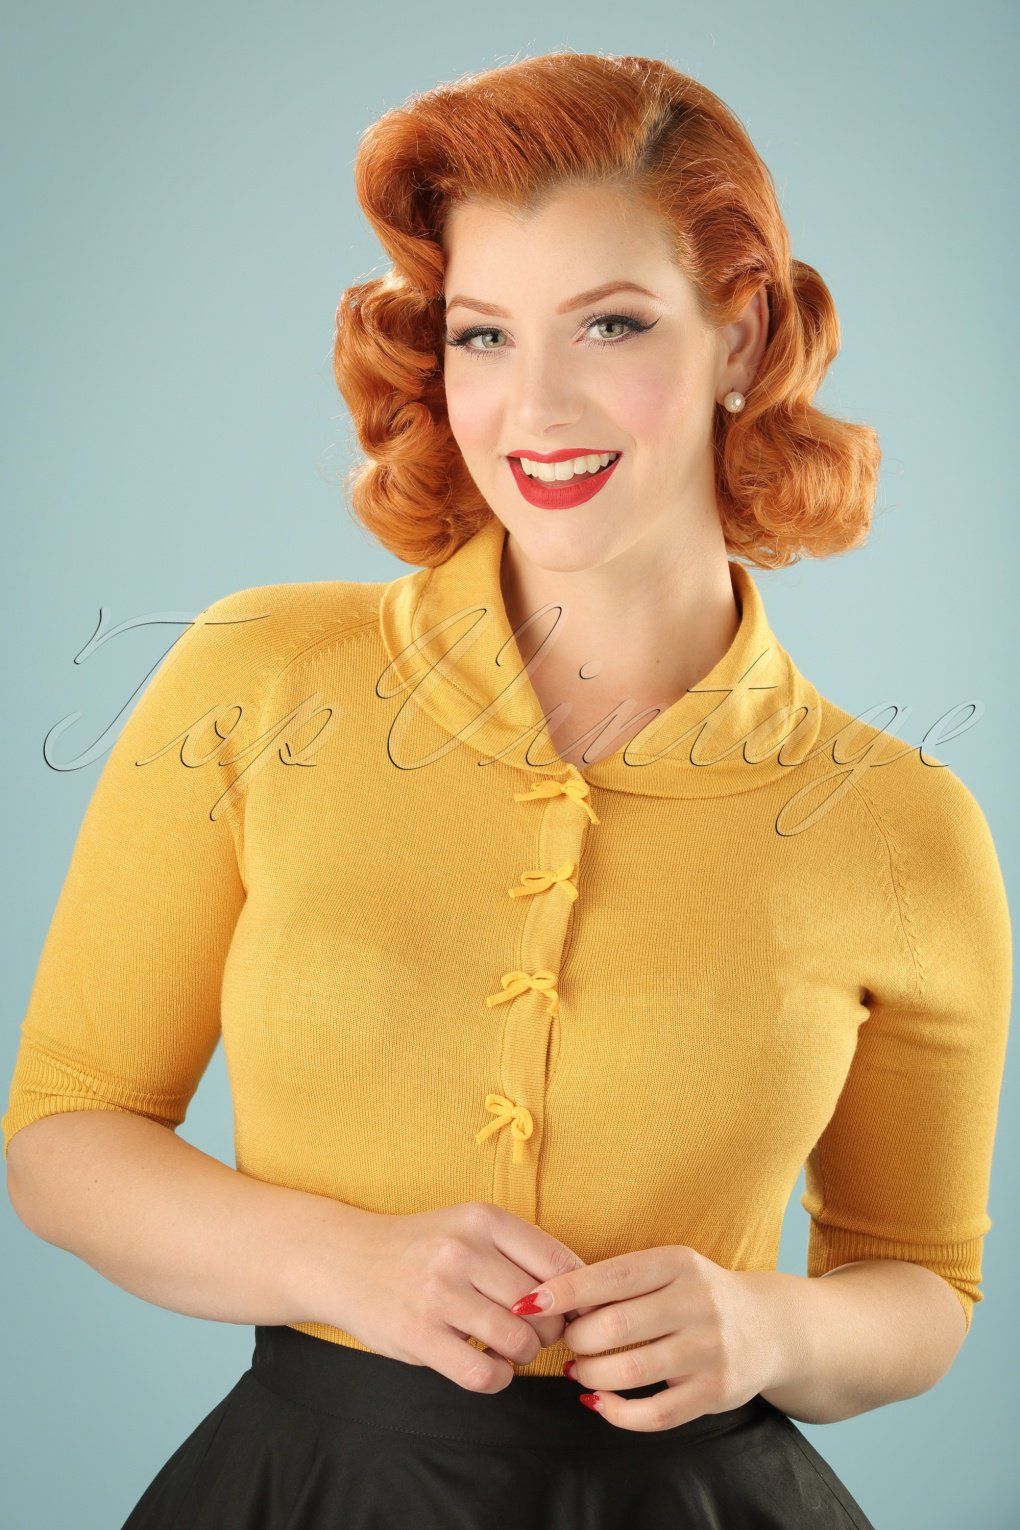 How to Style Mustard Yellow Top: 15 Cheerful Outfit Ideas for Women